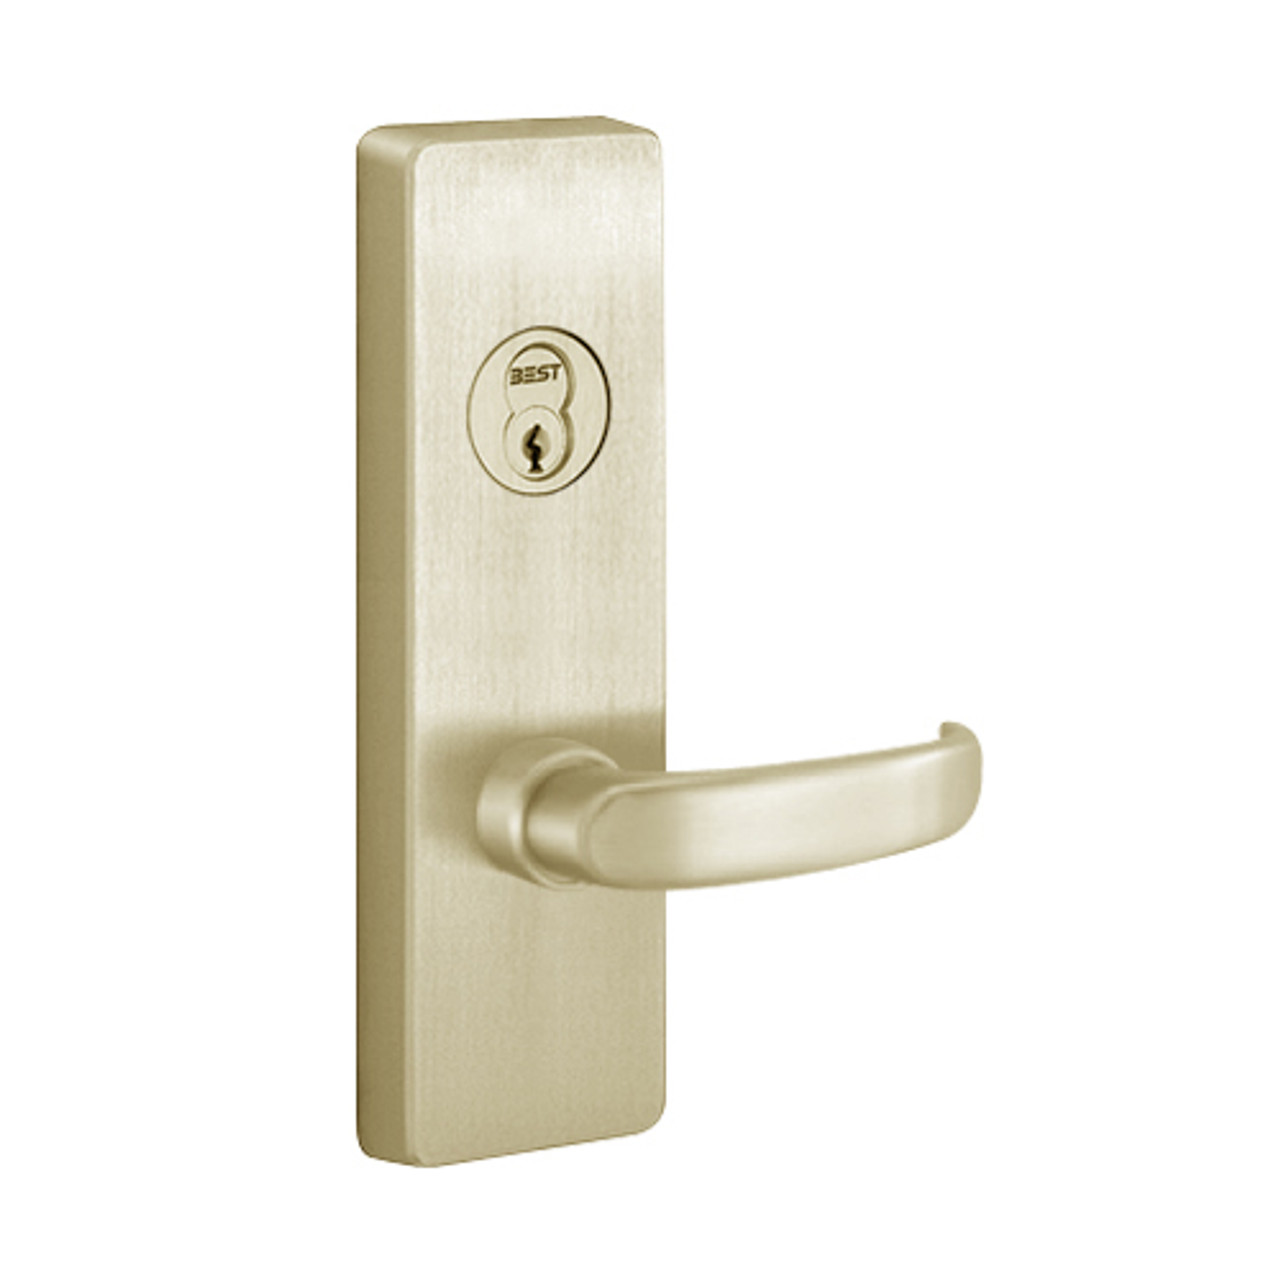 Y4908D-606-LHR PHI Key Controls Lever Trim with D Lever Design for Olympian Series Exit Device in Satin Brass Finish